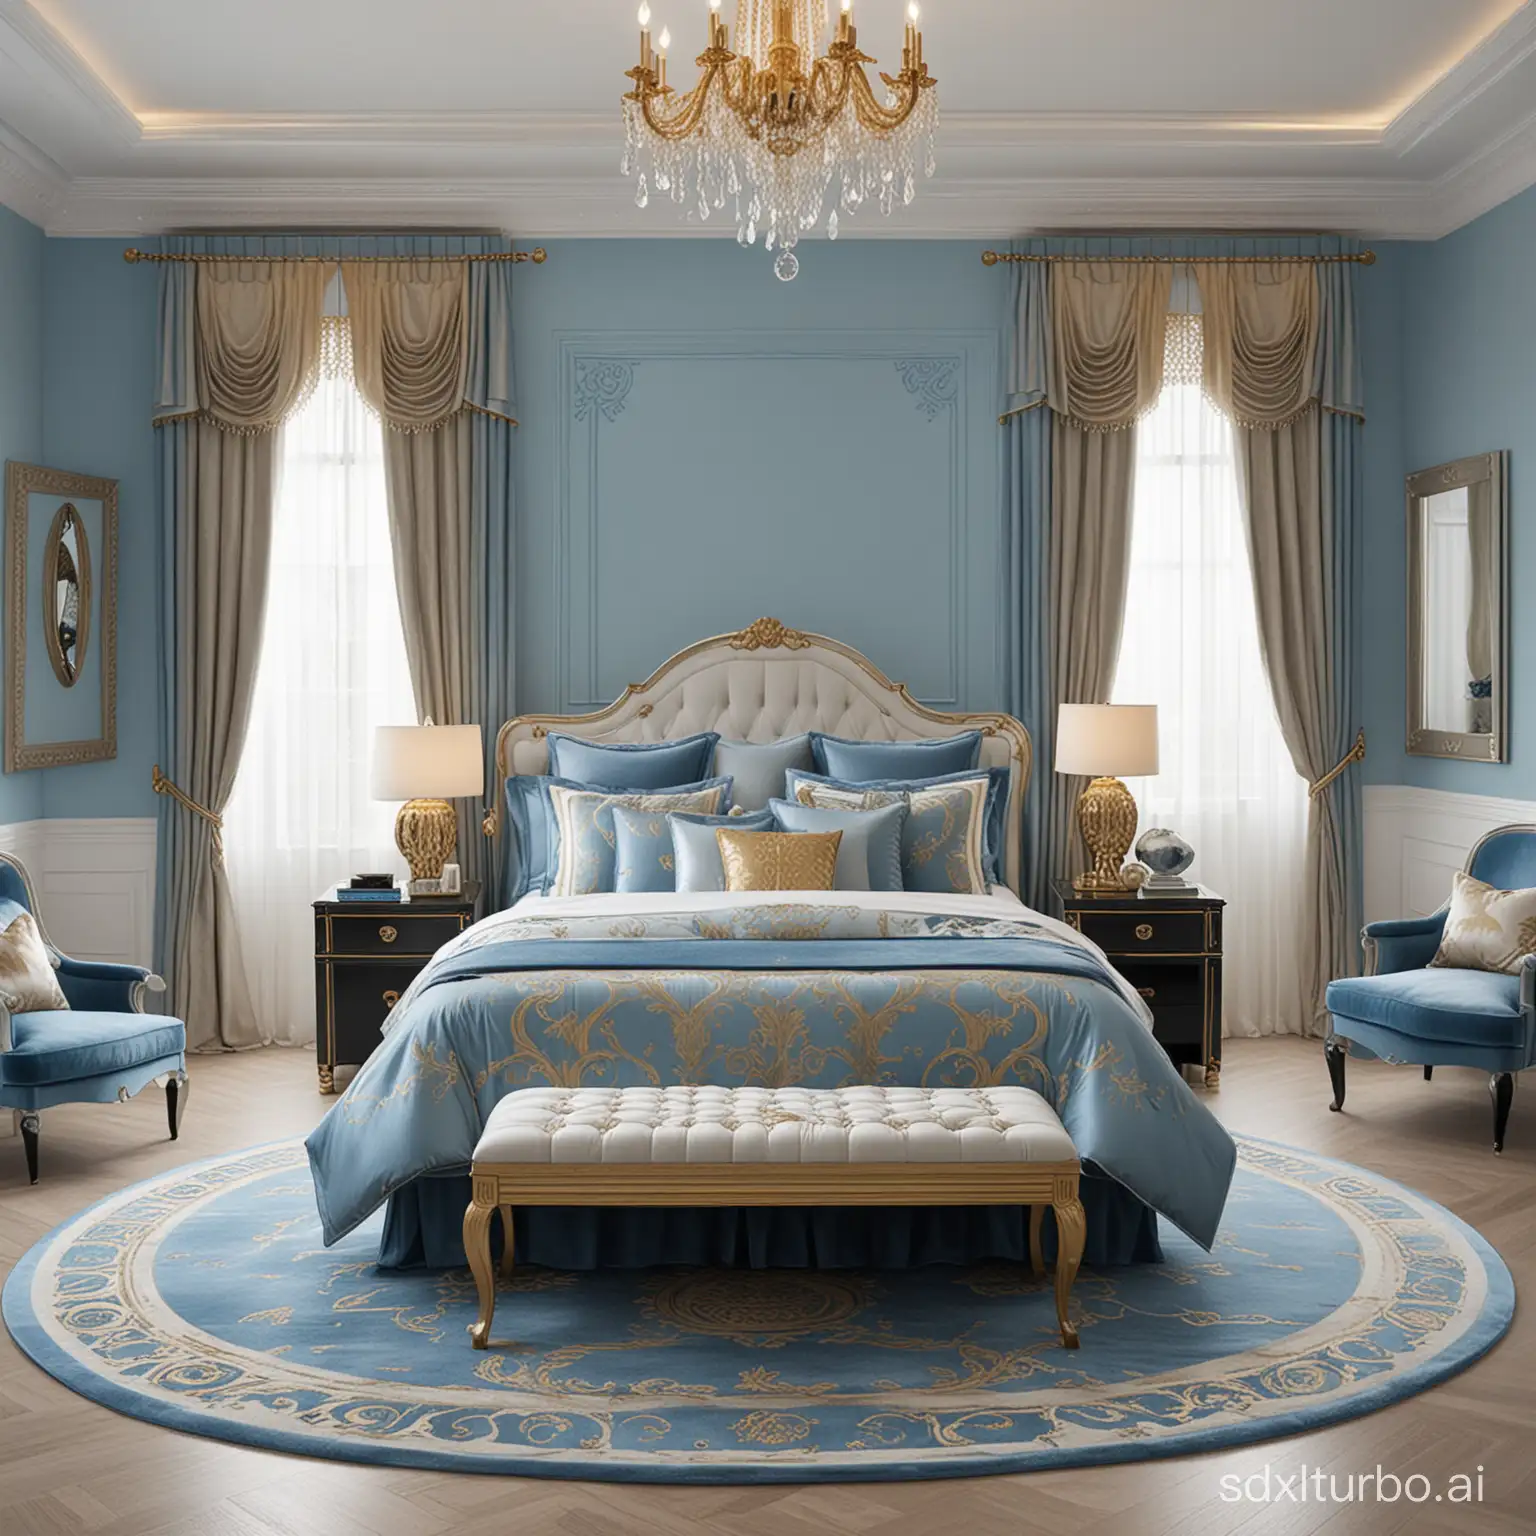 Urban-Bedroom-with-Crystal-Blue-Accents-and-Gold-Swags-Minimalist-Versace-Pattern